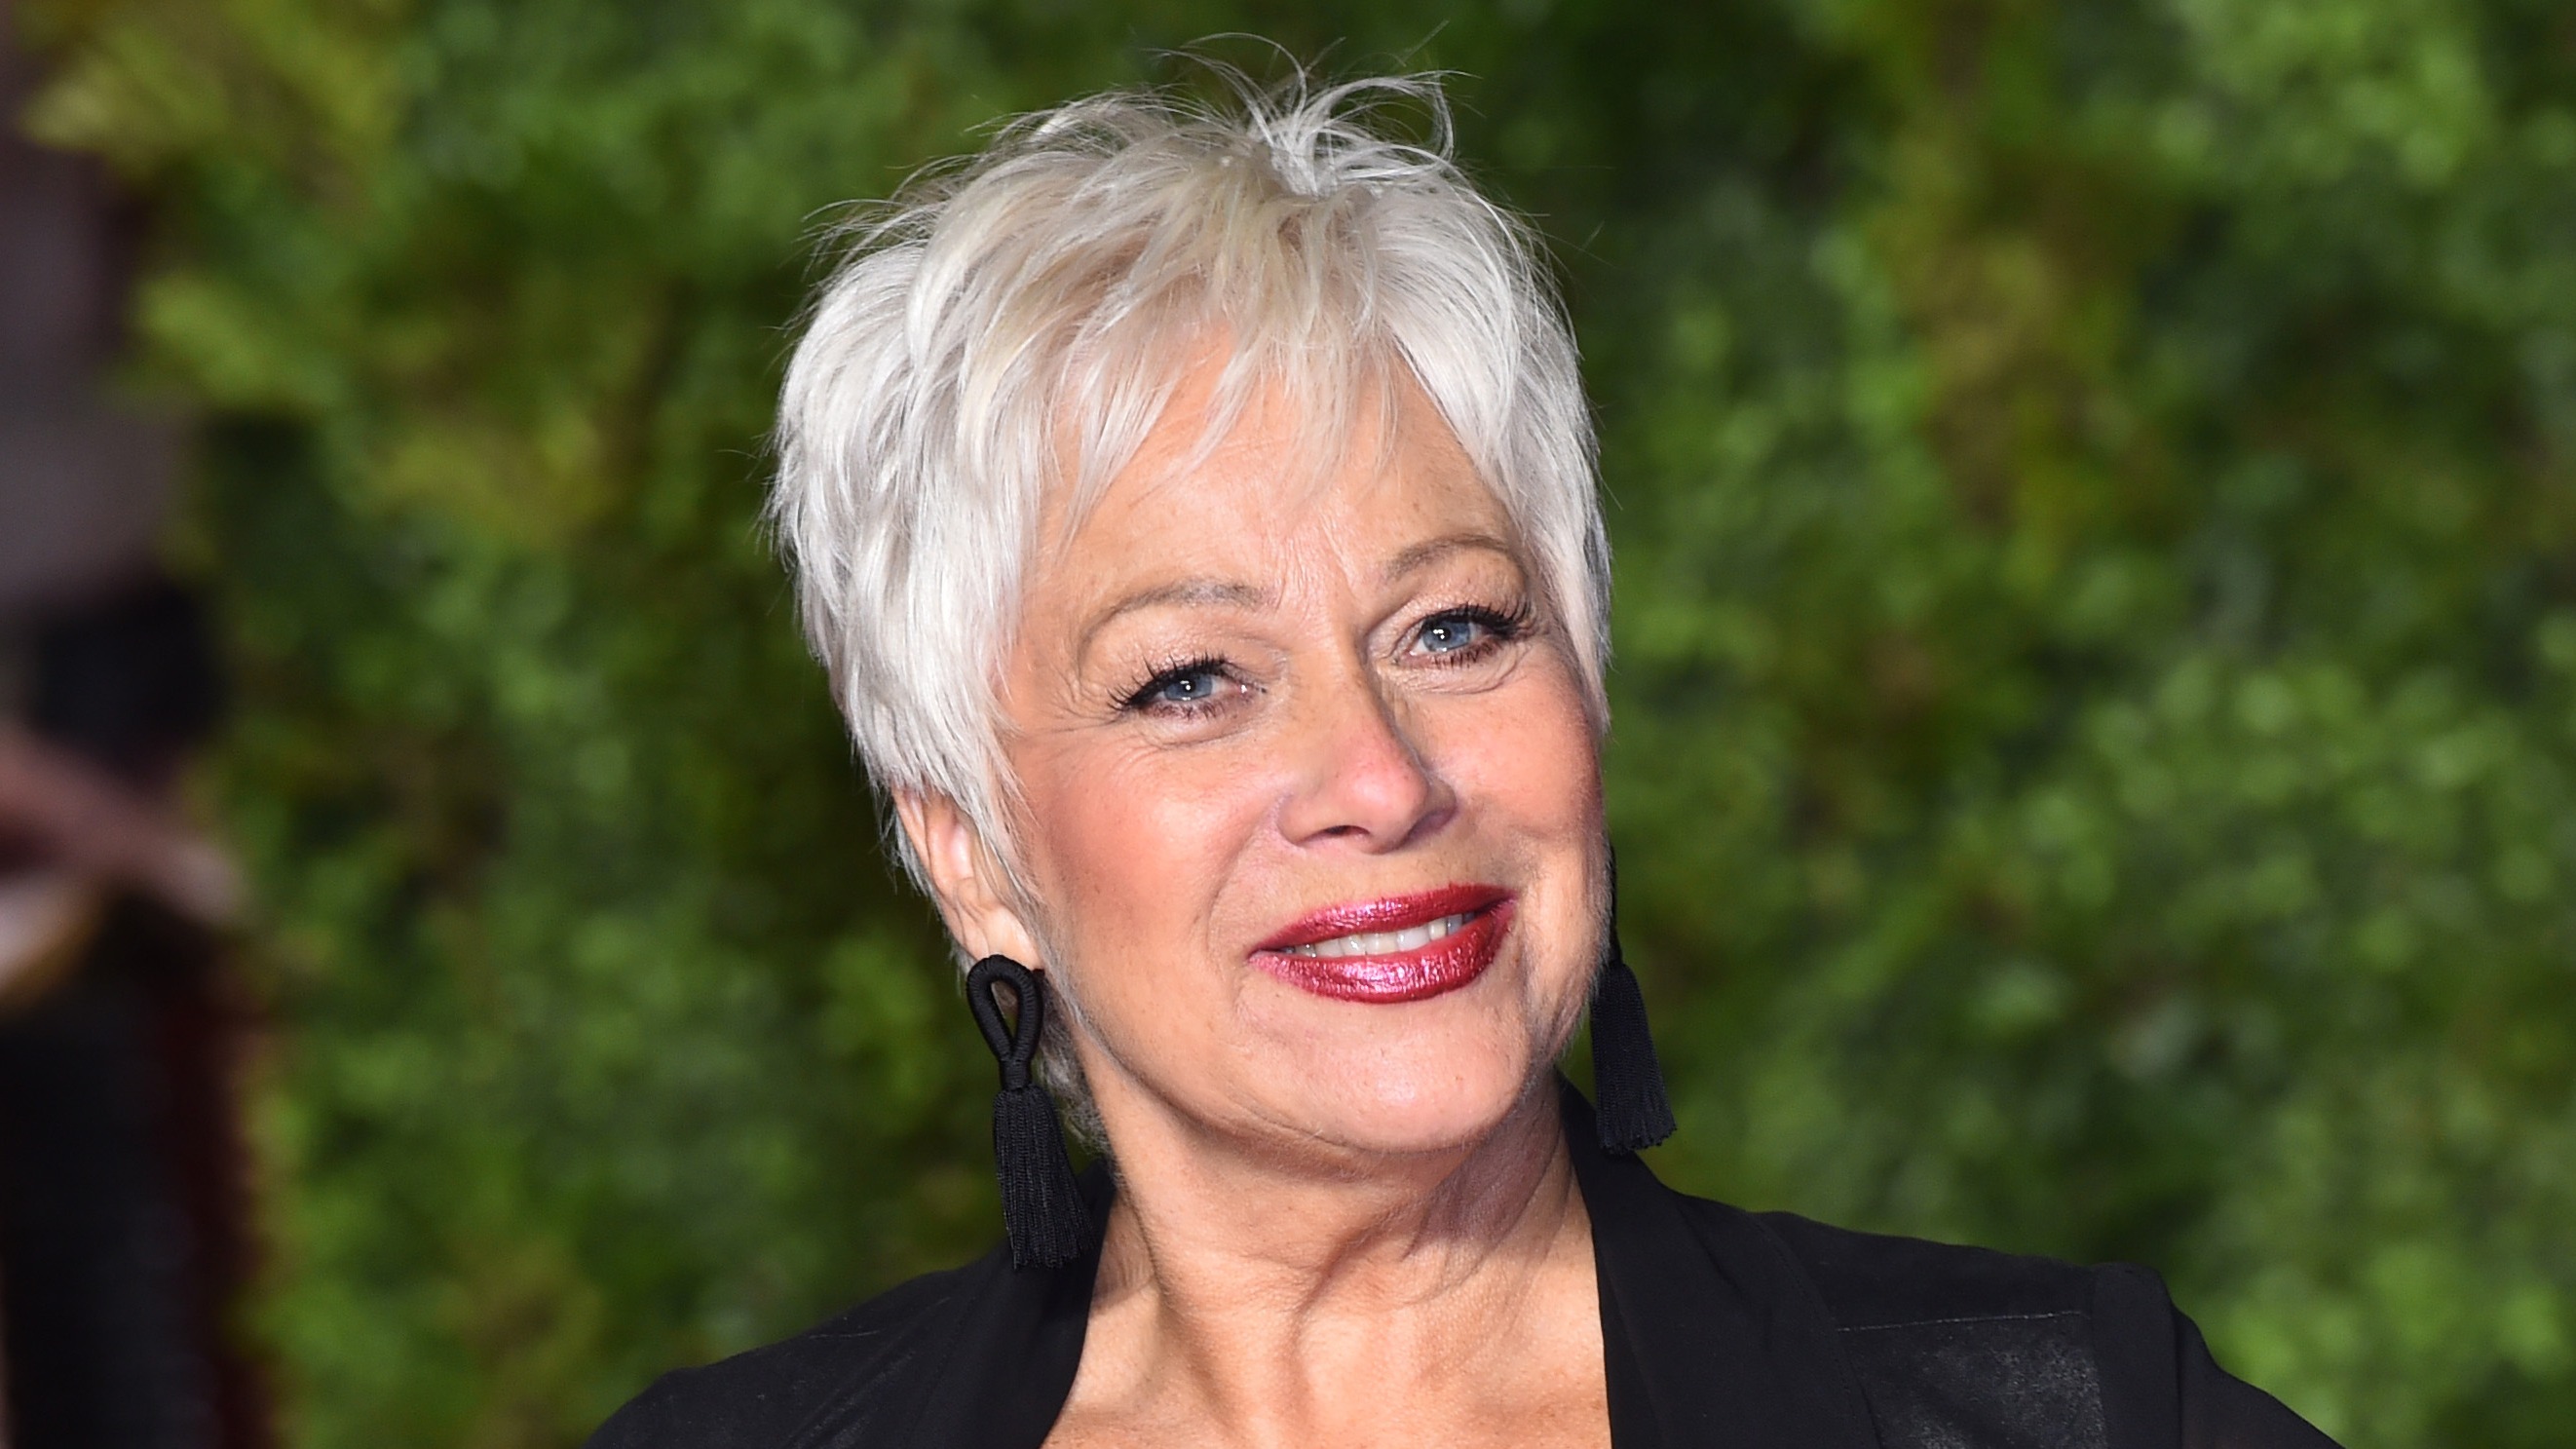 ITV Loose Women star Denise Welch reassures fans she is alive